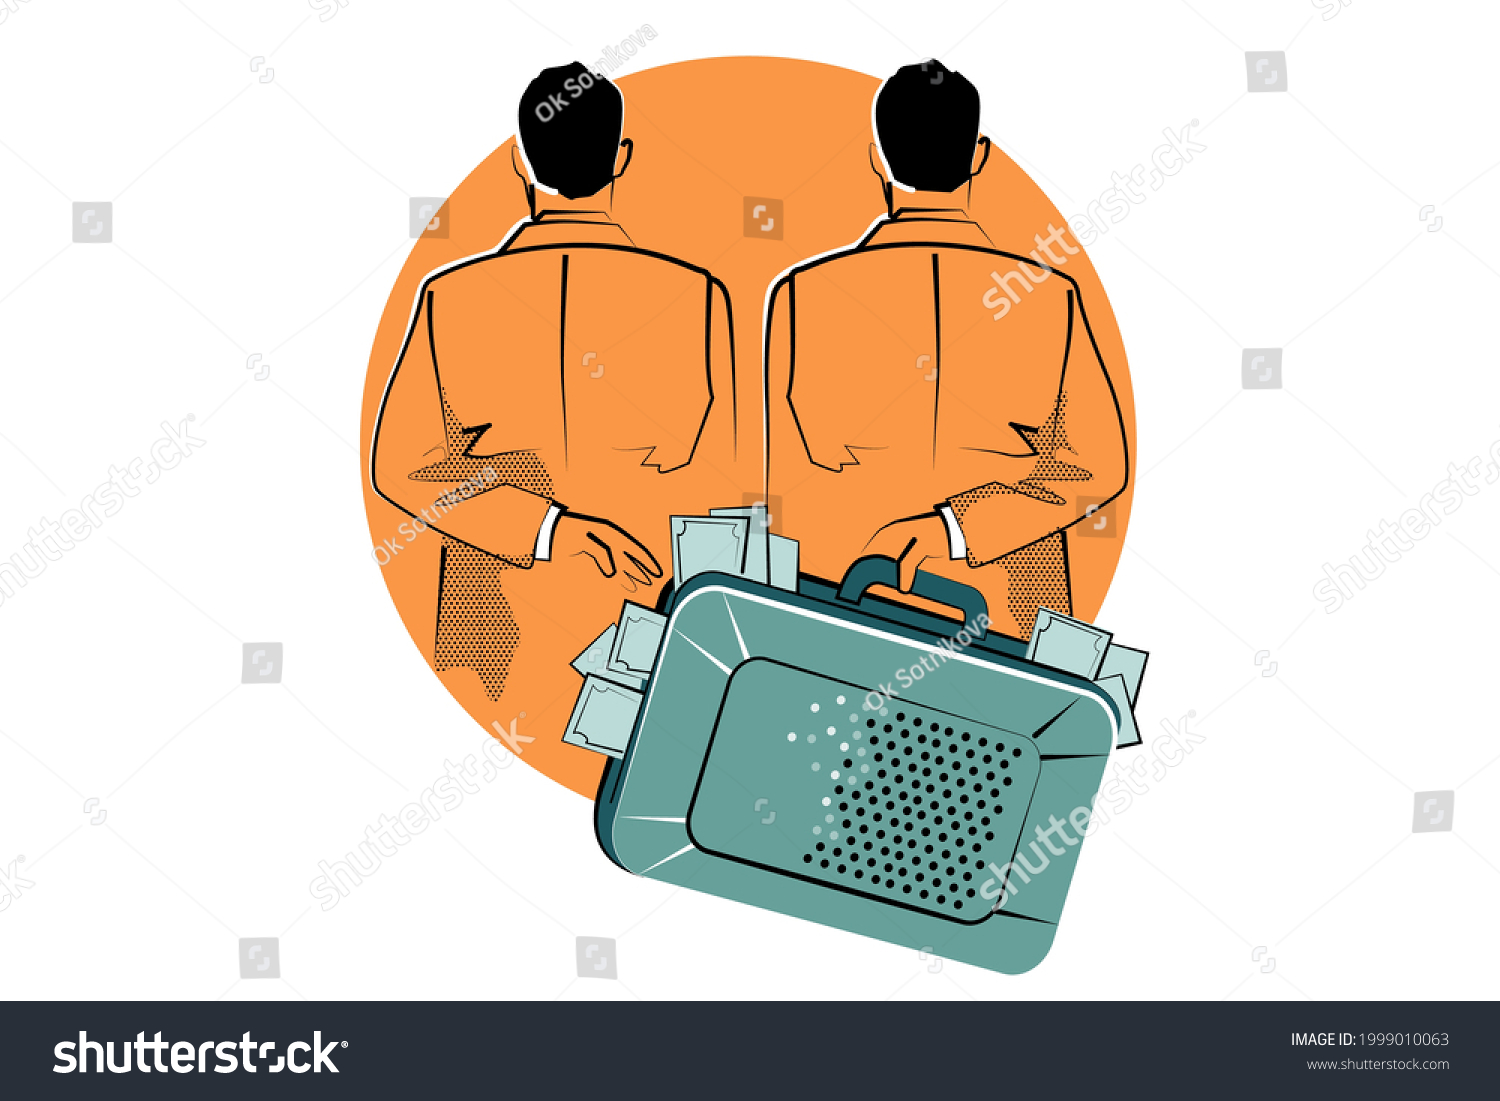 SVG of Concept of Corruption, Dishonest or fraudulent conduct by those in power, involving Bribery. Vector illustration of two men hand over money, bribe in suitcase. svg